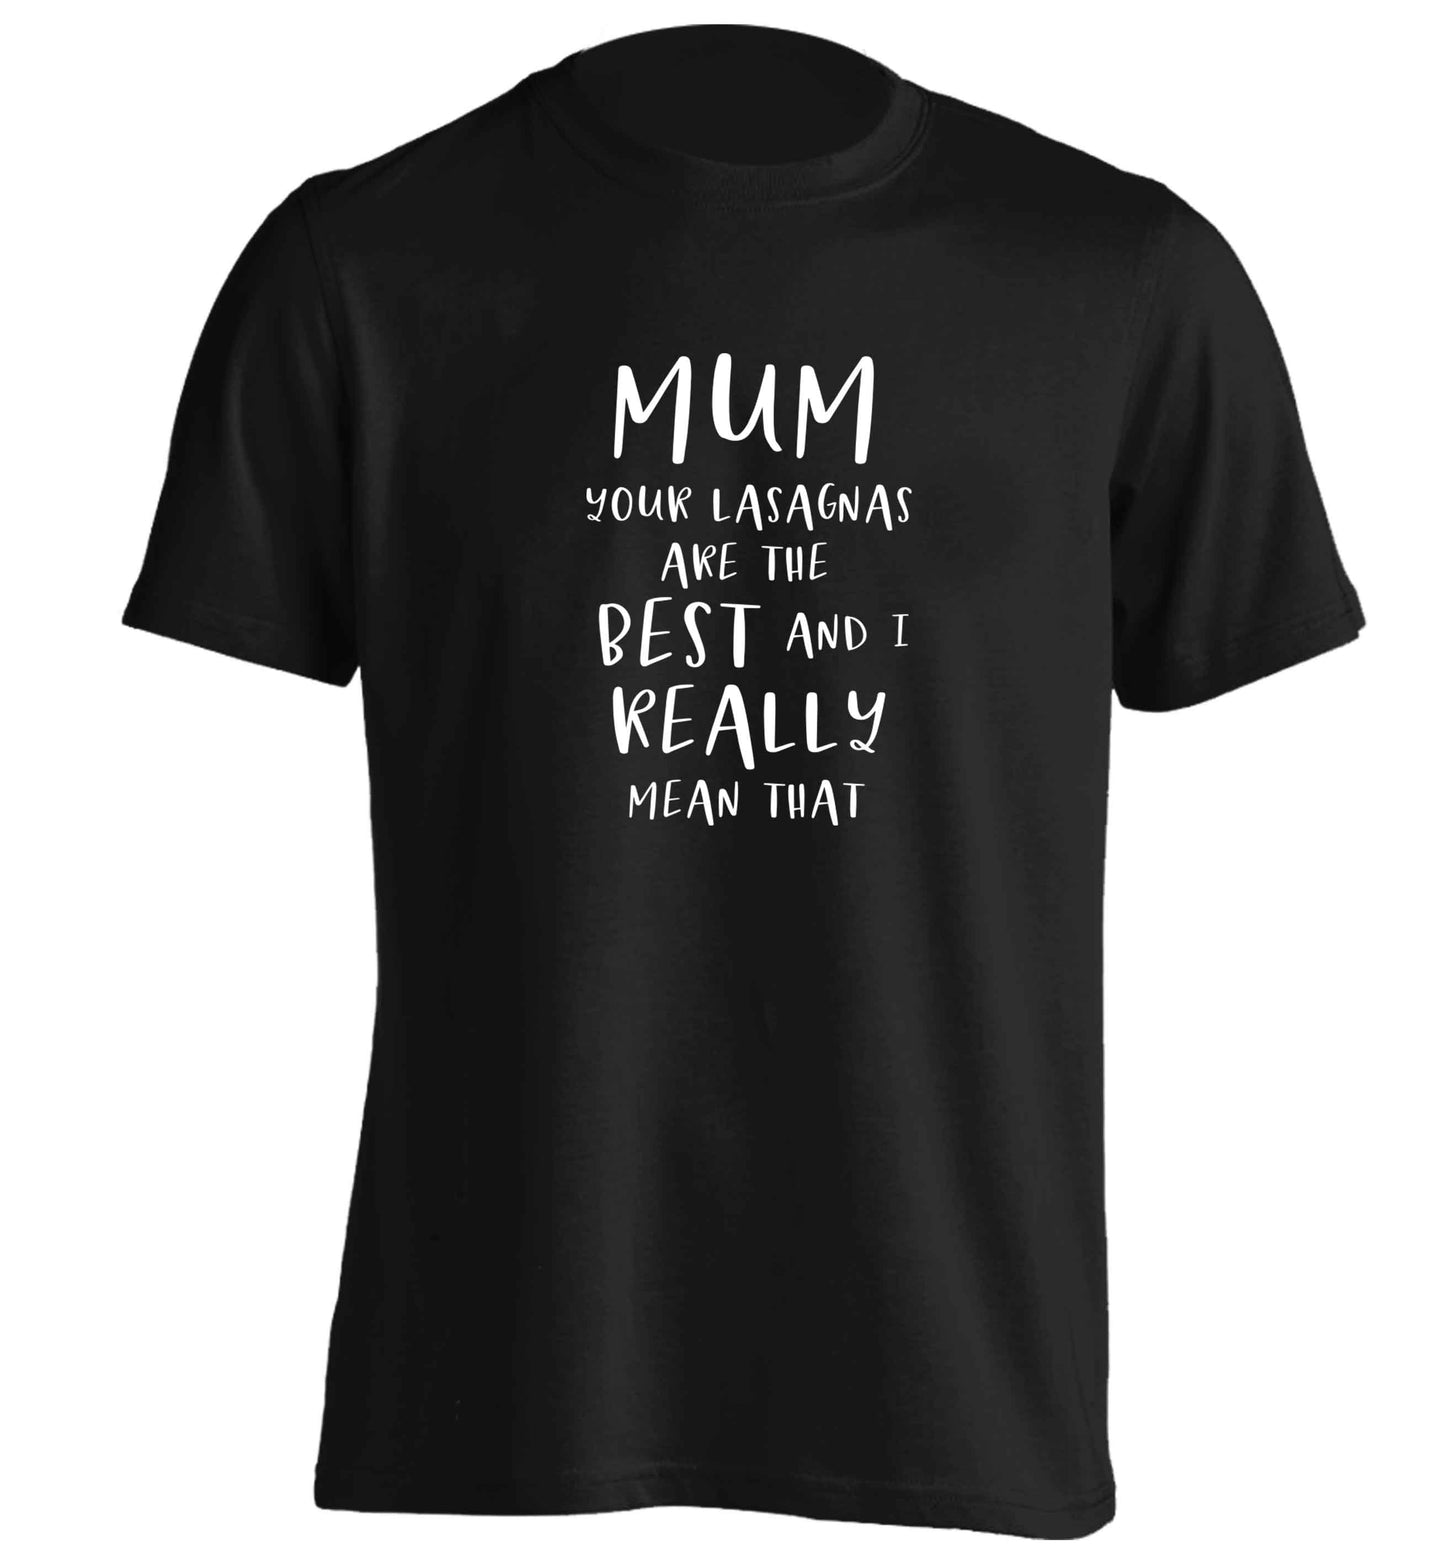 Funny gifts for your mum on mother's dayor her birthday! Mum your lasagnas are the best and I really mean that adults unisex black Tshirt 2XL